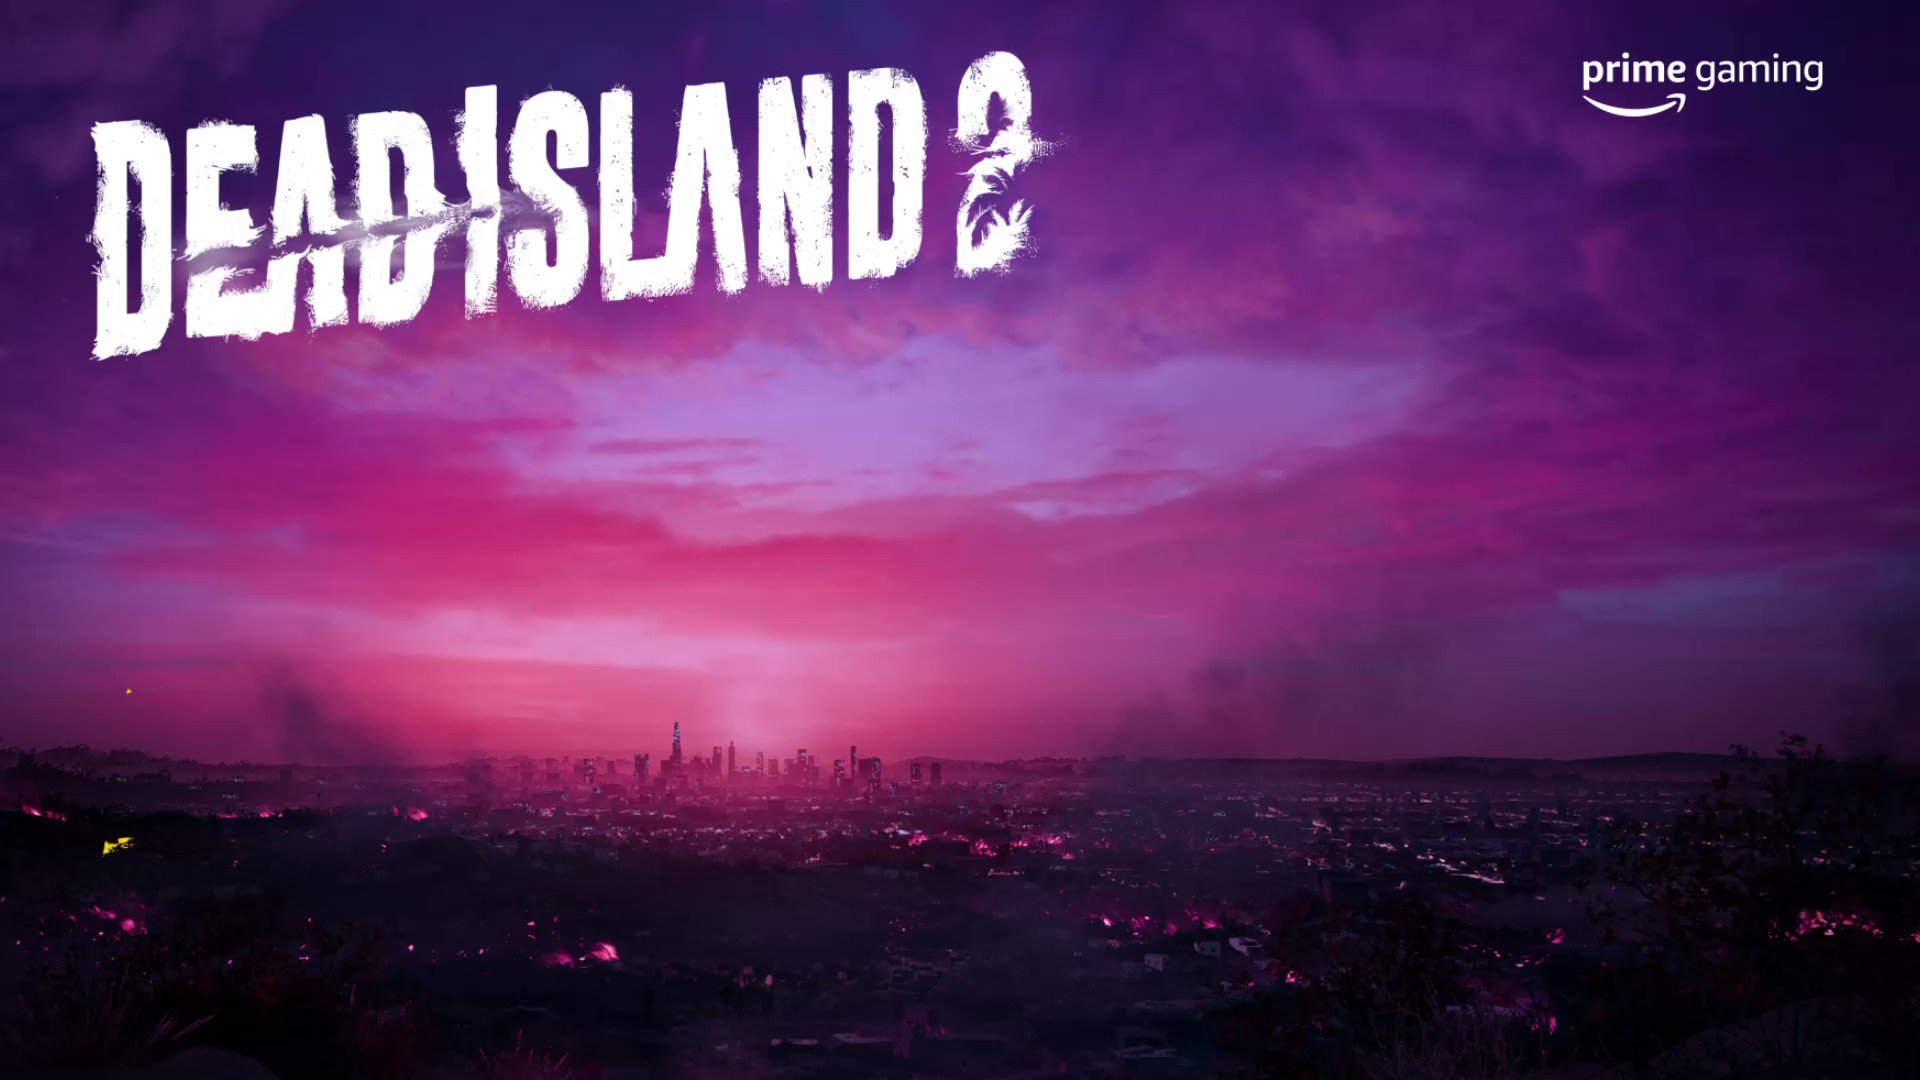 Can you play Dead Island 2 on cloud gaming services?